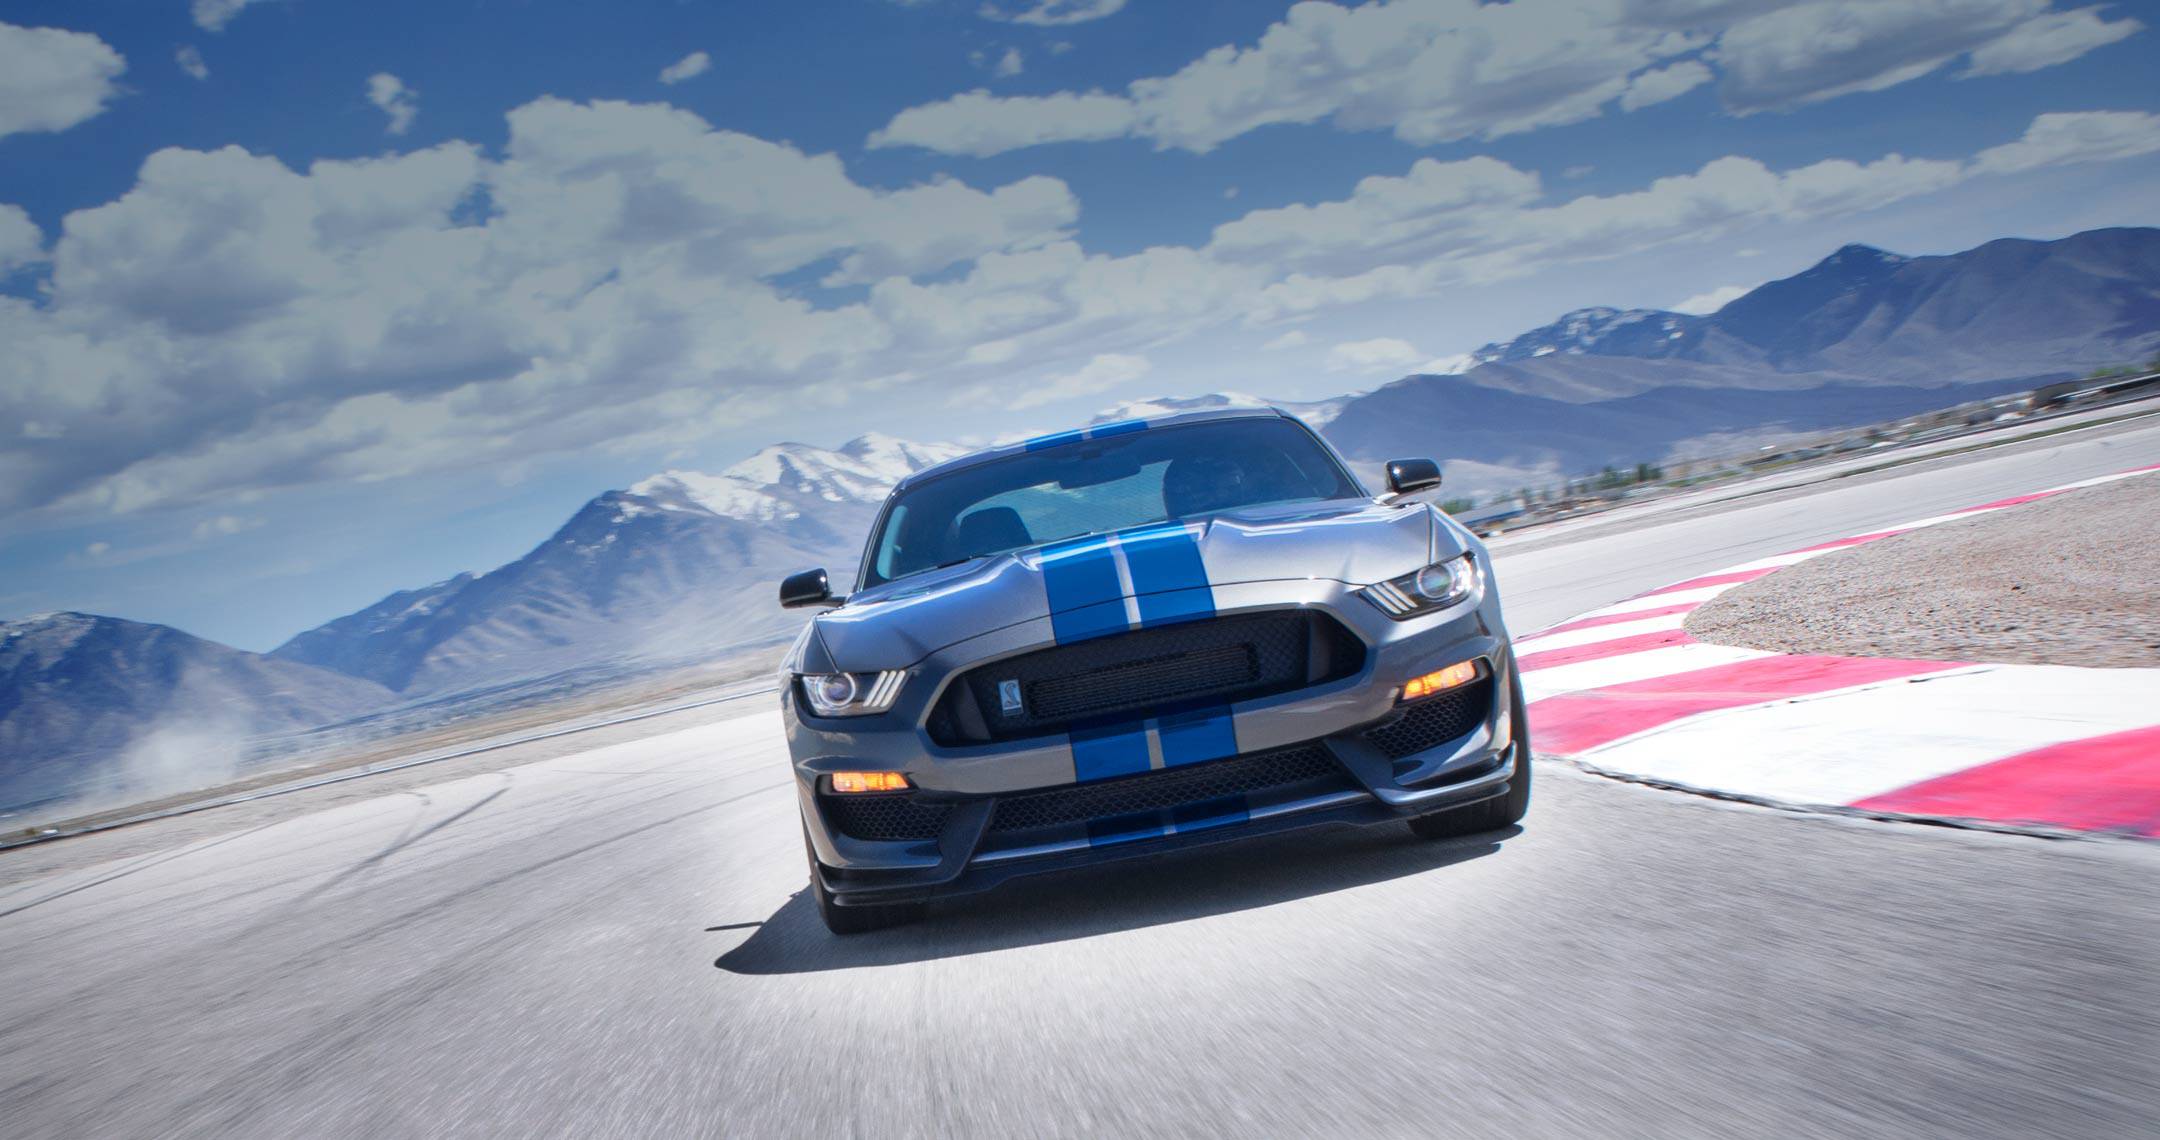 HD Quality Wallpaper | Collection: Vehicles, 2160x1140 Ford Mustang Shelby